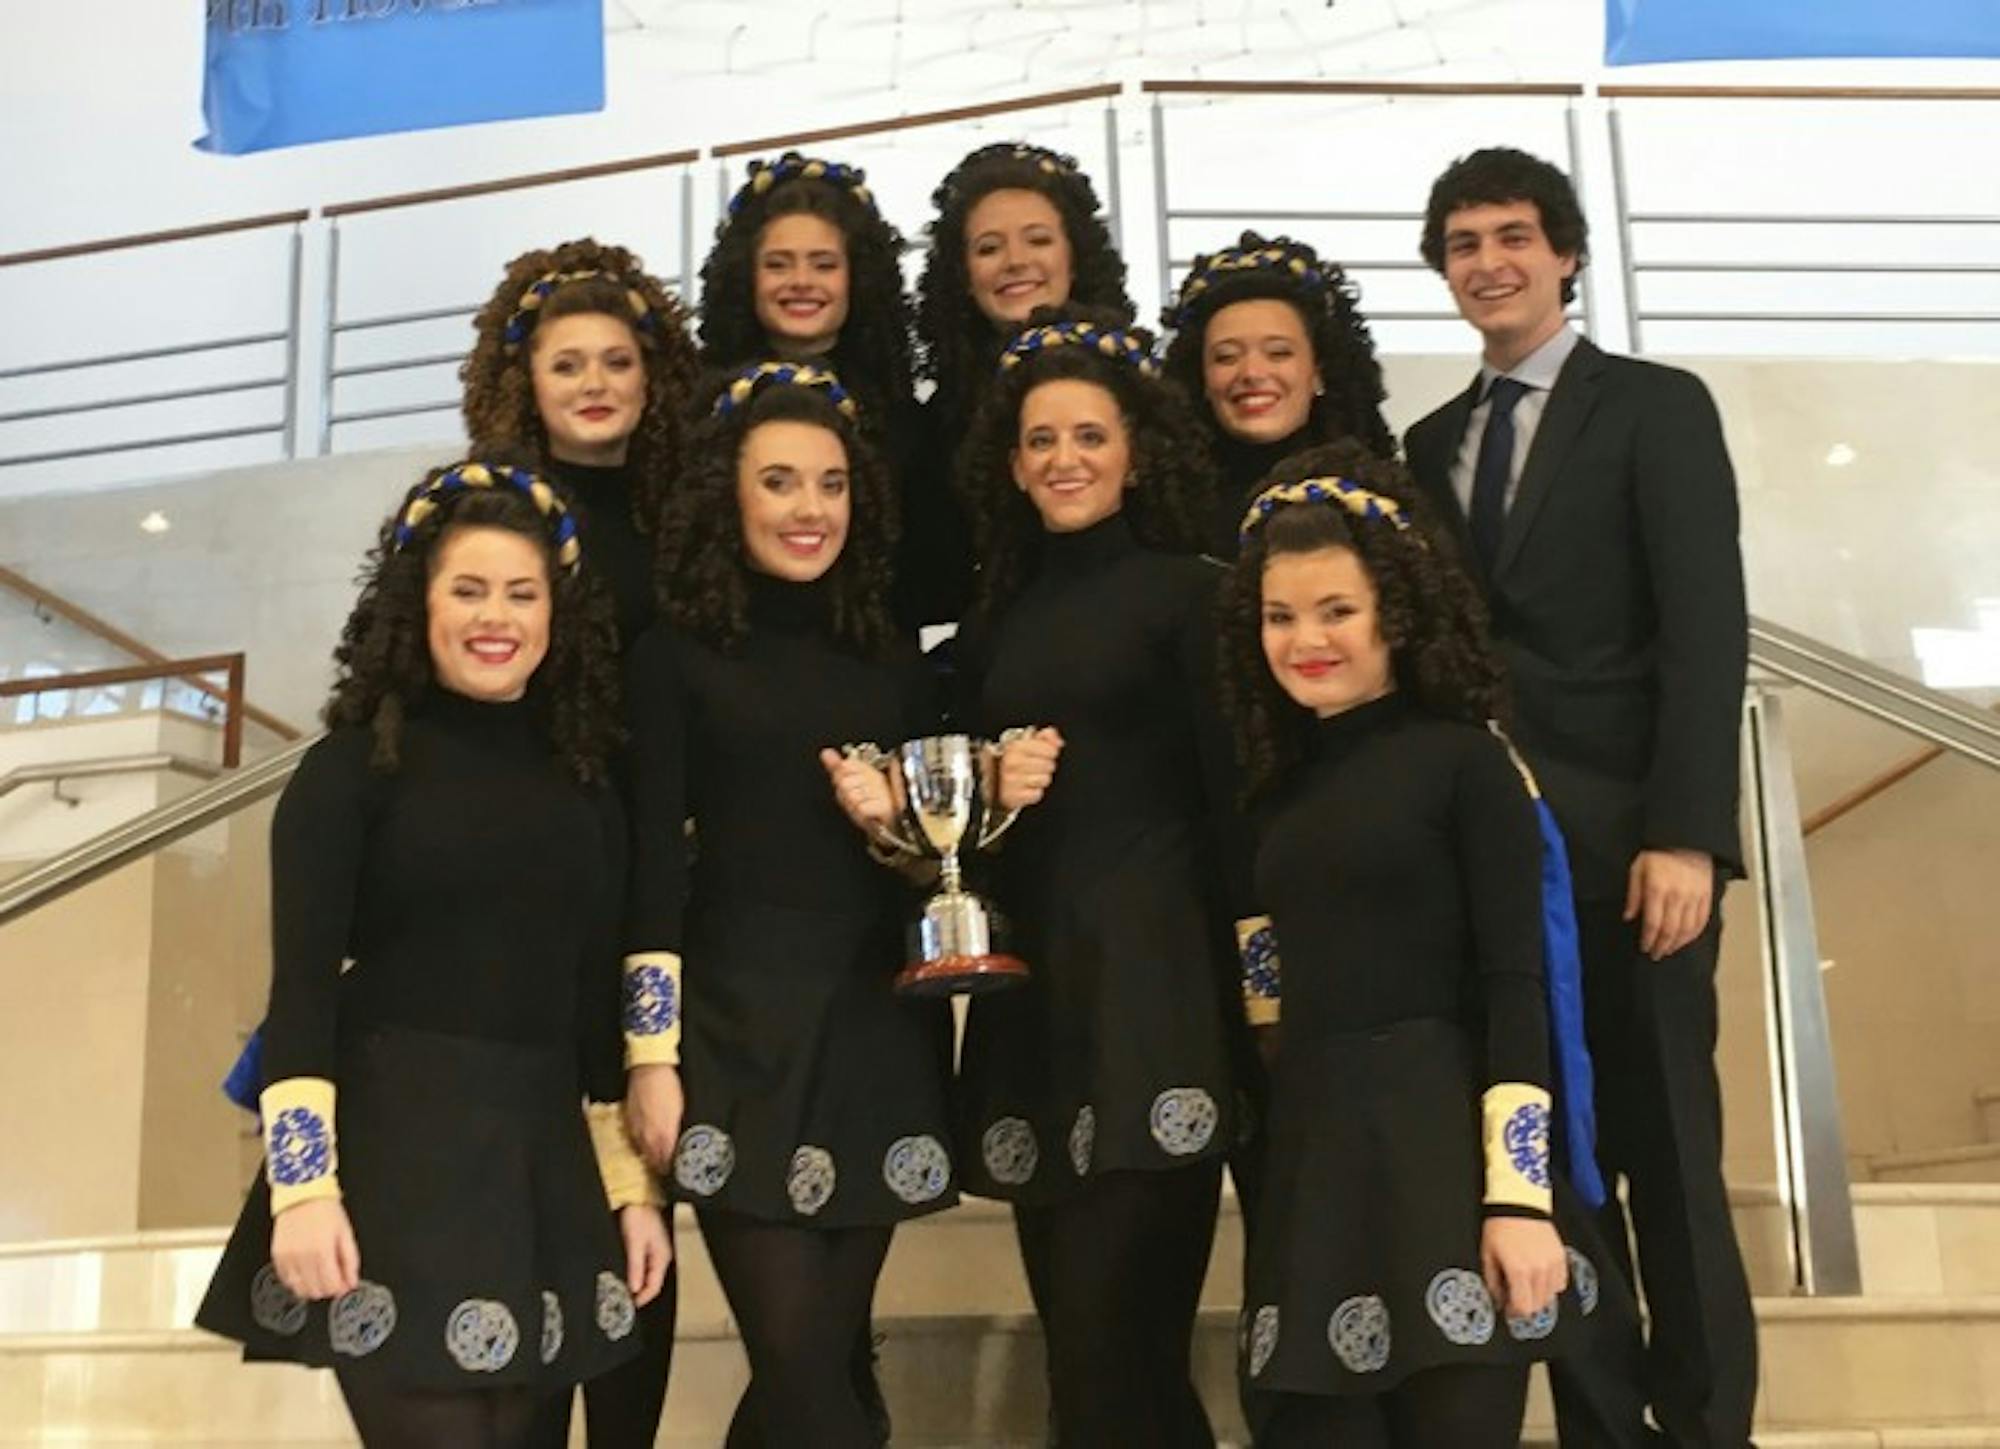 The eight ceili dancers on the Notre Dame/Saint Mary’s Irish Dance Team and their student coach, Robert Black, hold their championship trophy.